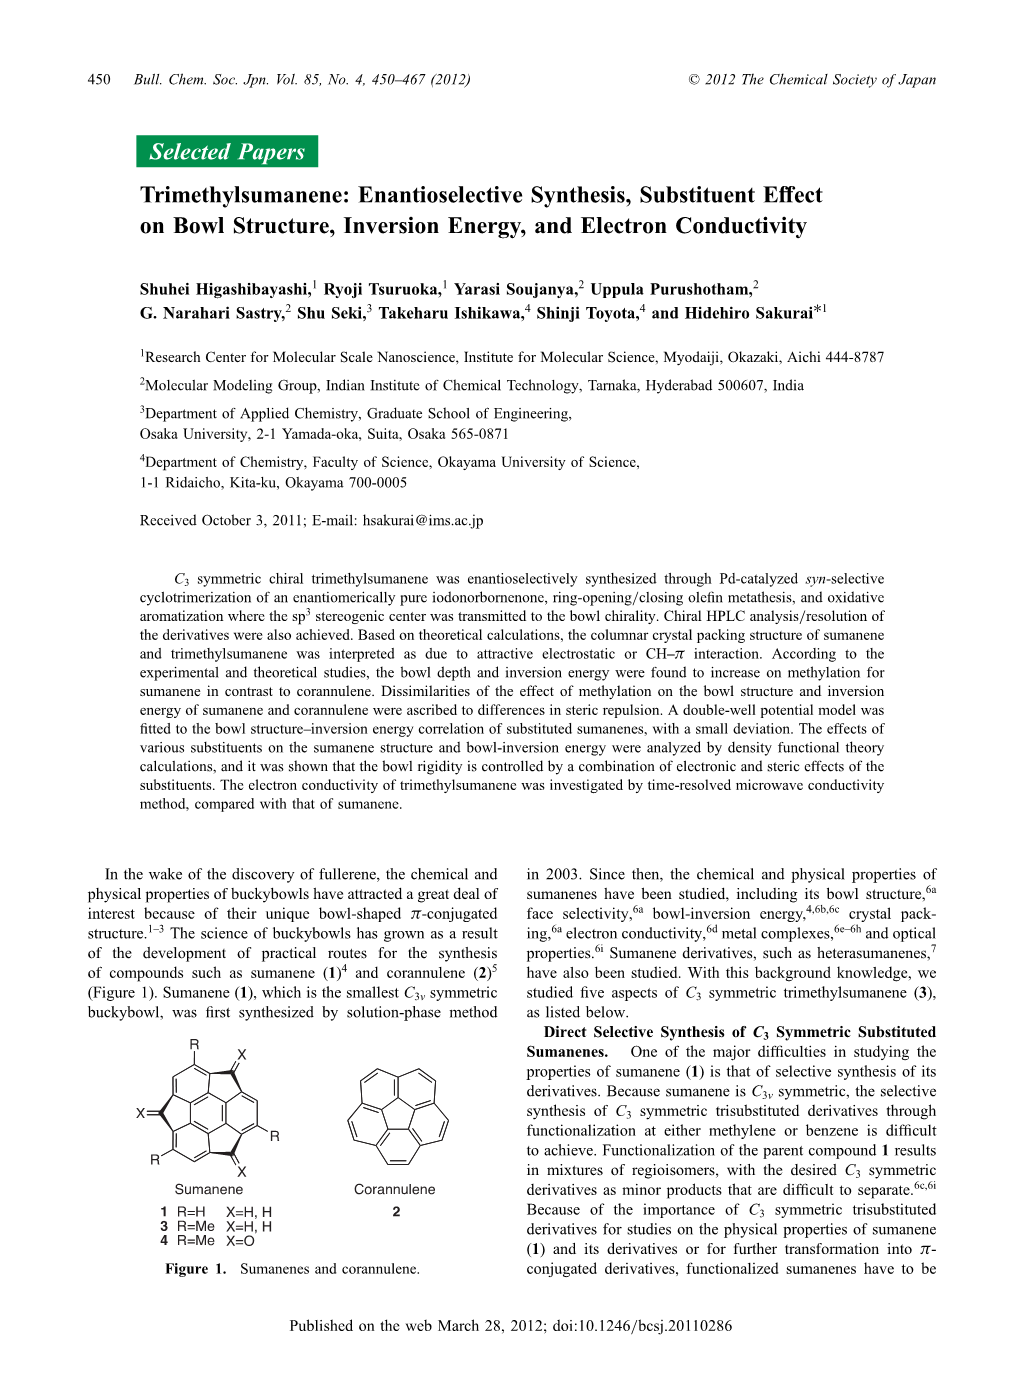 Trimethylsumanene: Enantioselective Synthesis, Substituent Effect on Bowl Structure, Inversion Energy, and Electron Conductivity